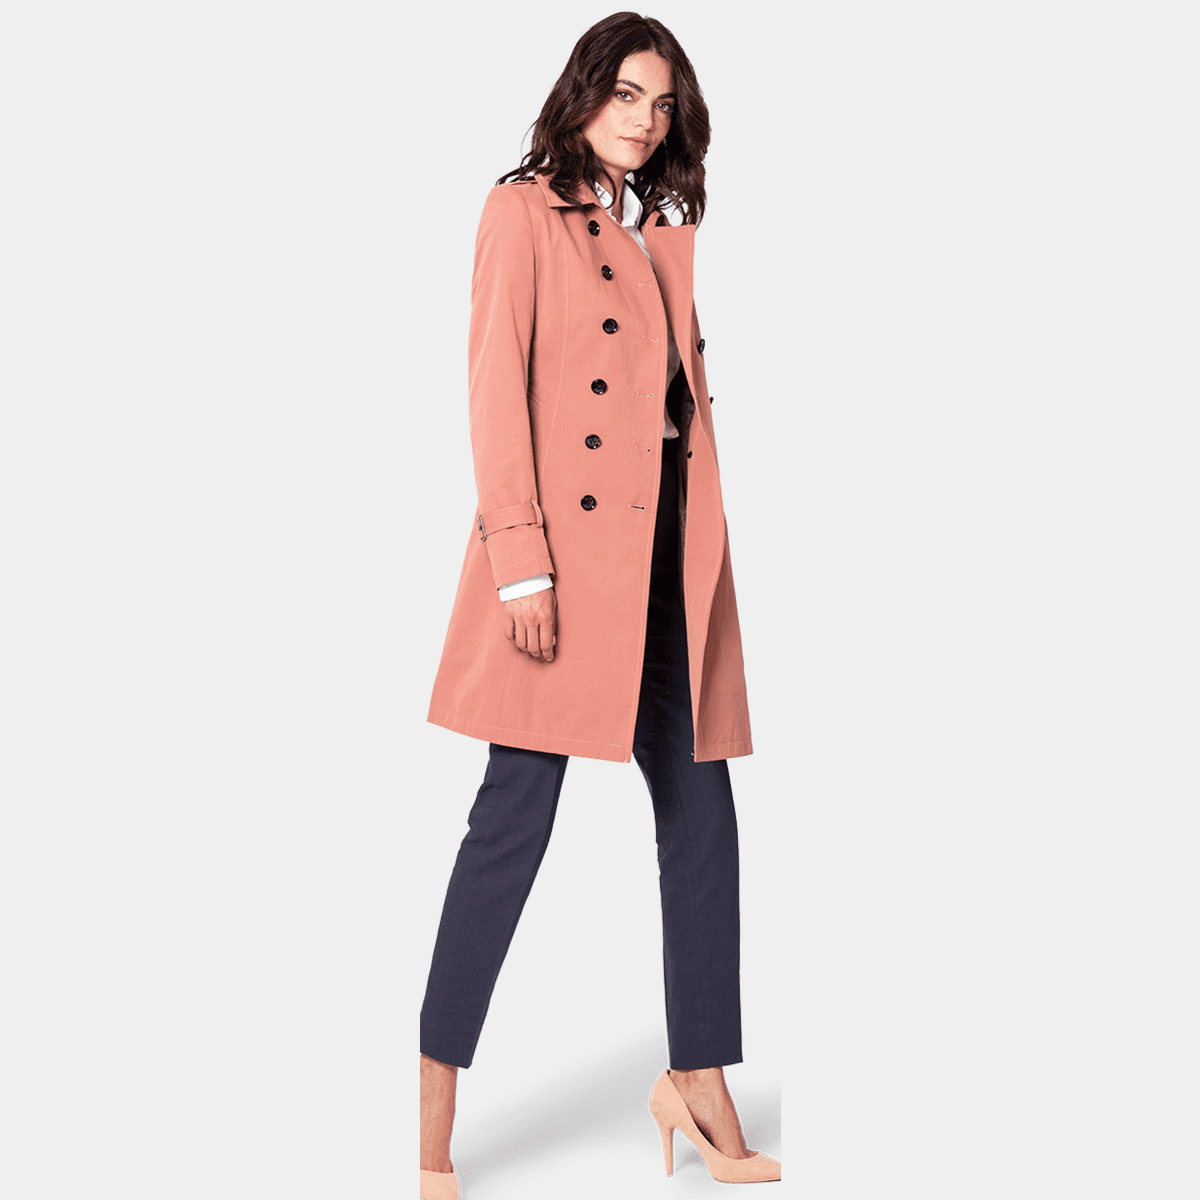 Trench Coat Guide: History, How To Wear, & Where To Buy